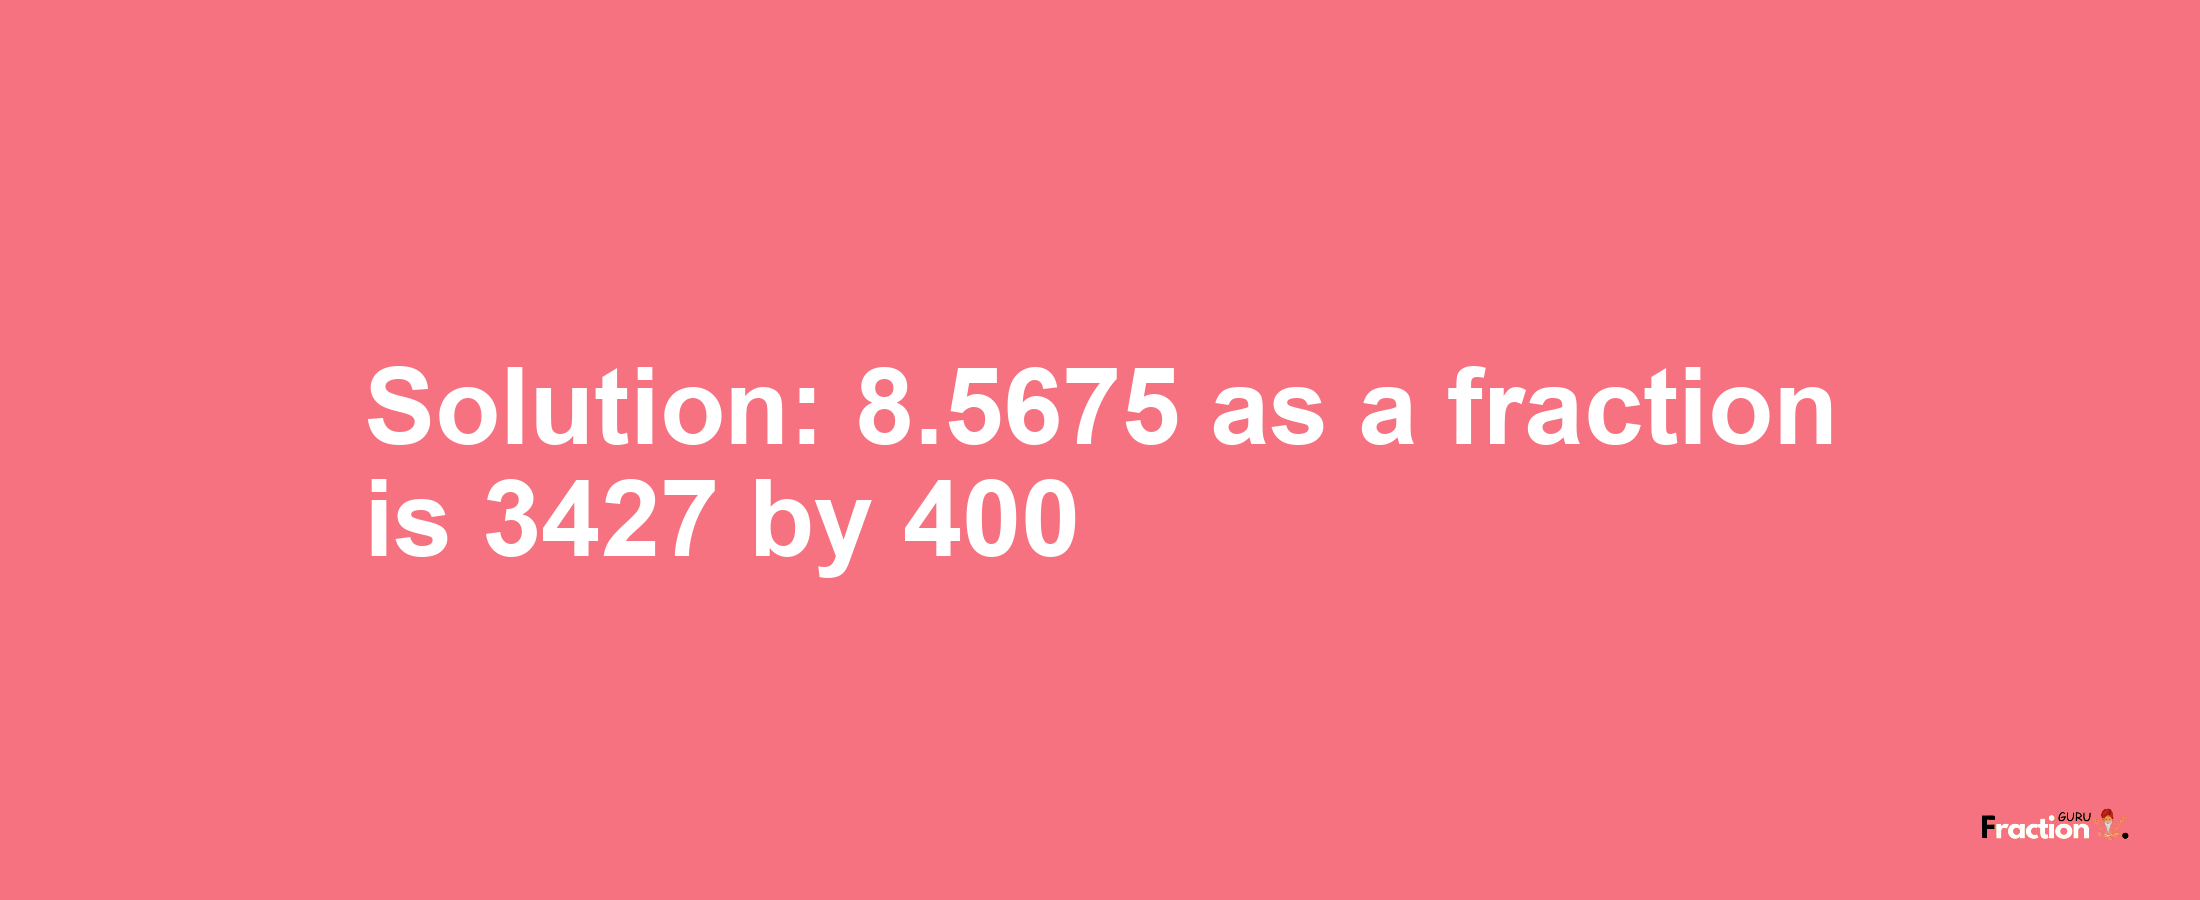 Solution:8.5675 as a fraction is 3427/400